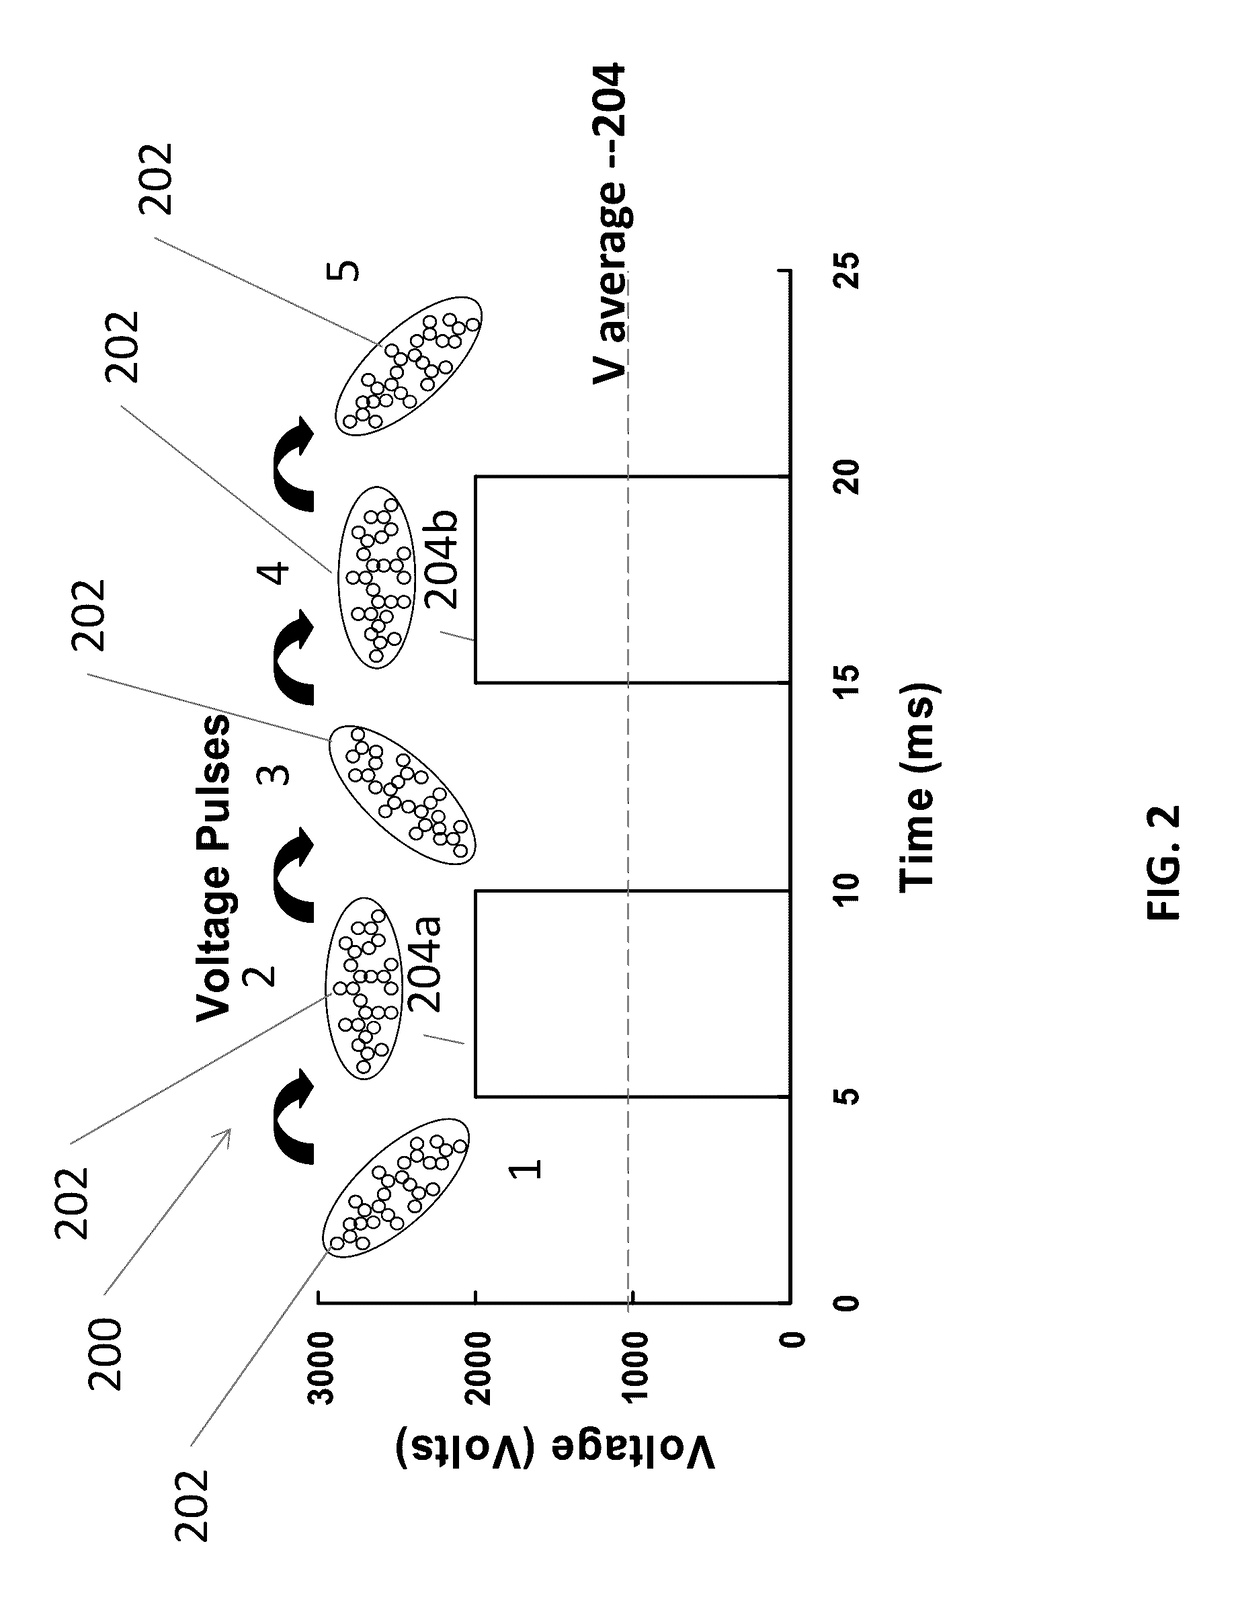 Pulsed-field differential mobility analyzer system and method for separating particles and measuring shape parameters for non-spherical particles